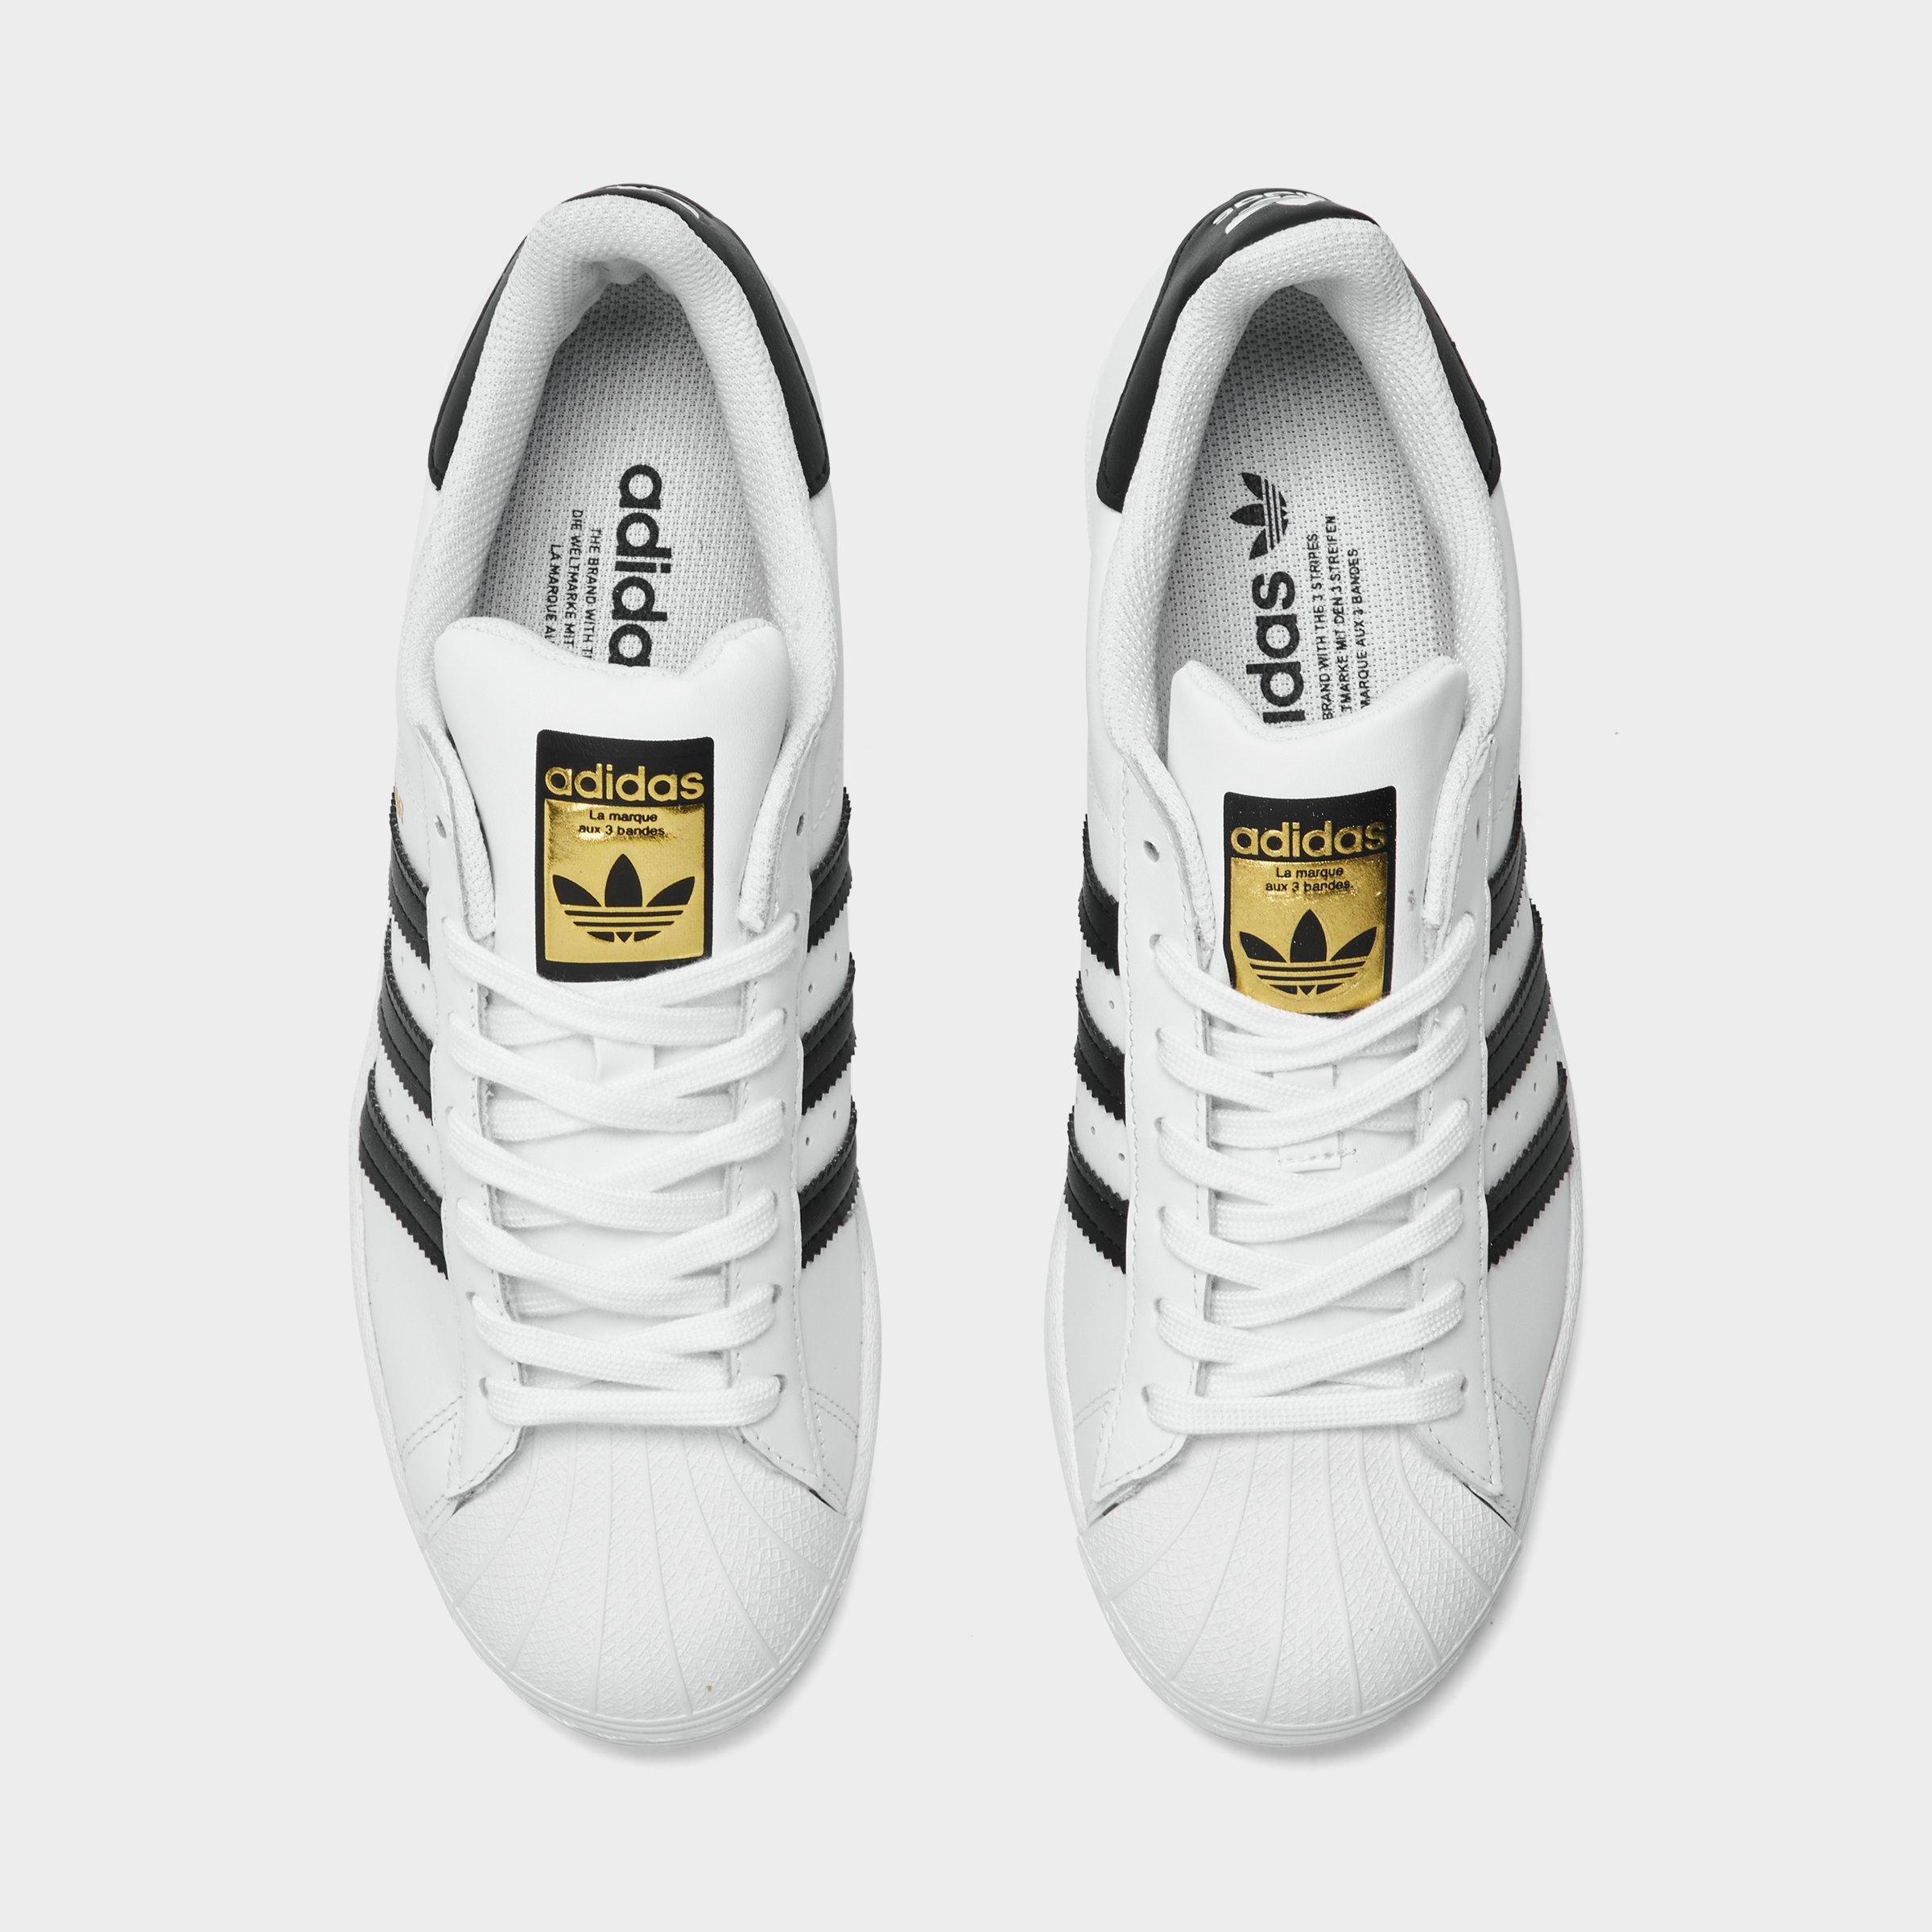 women's adidas superstar casual shoes